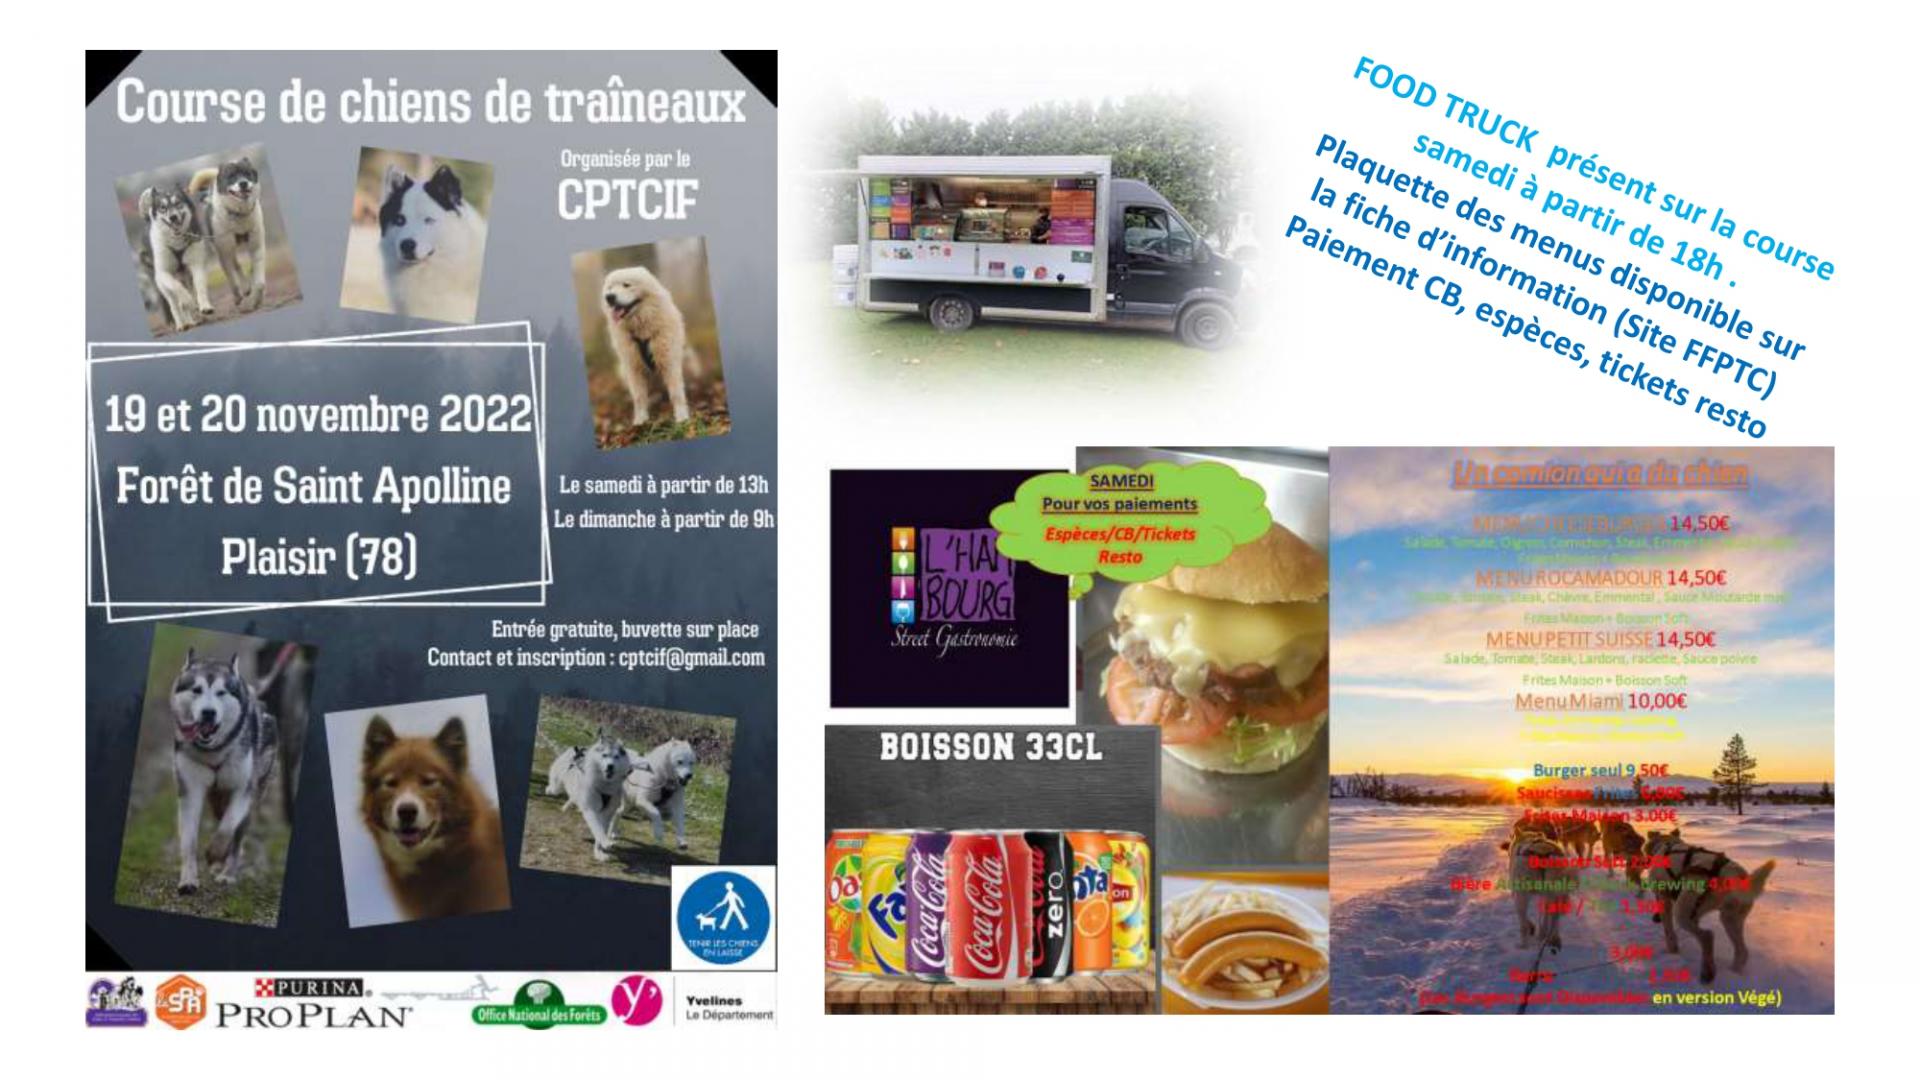 Neauphle combi food truck affiche 1 page 0001